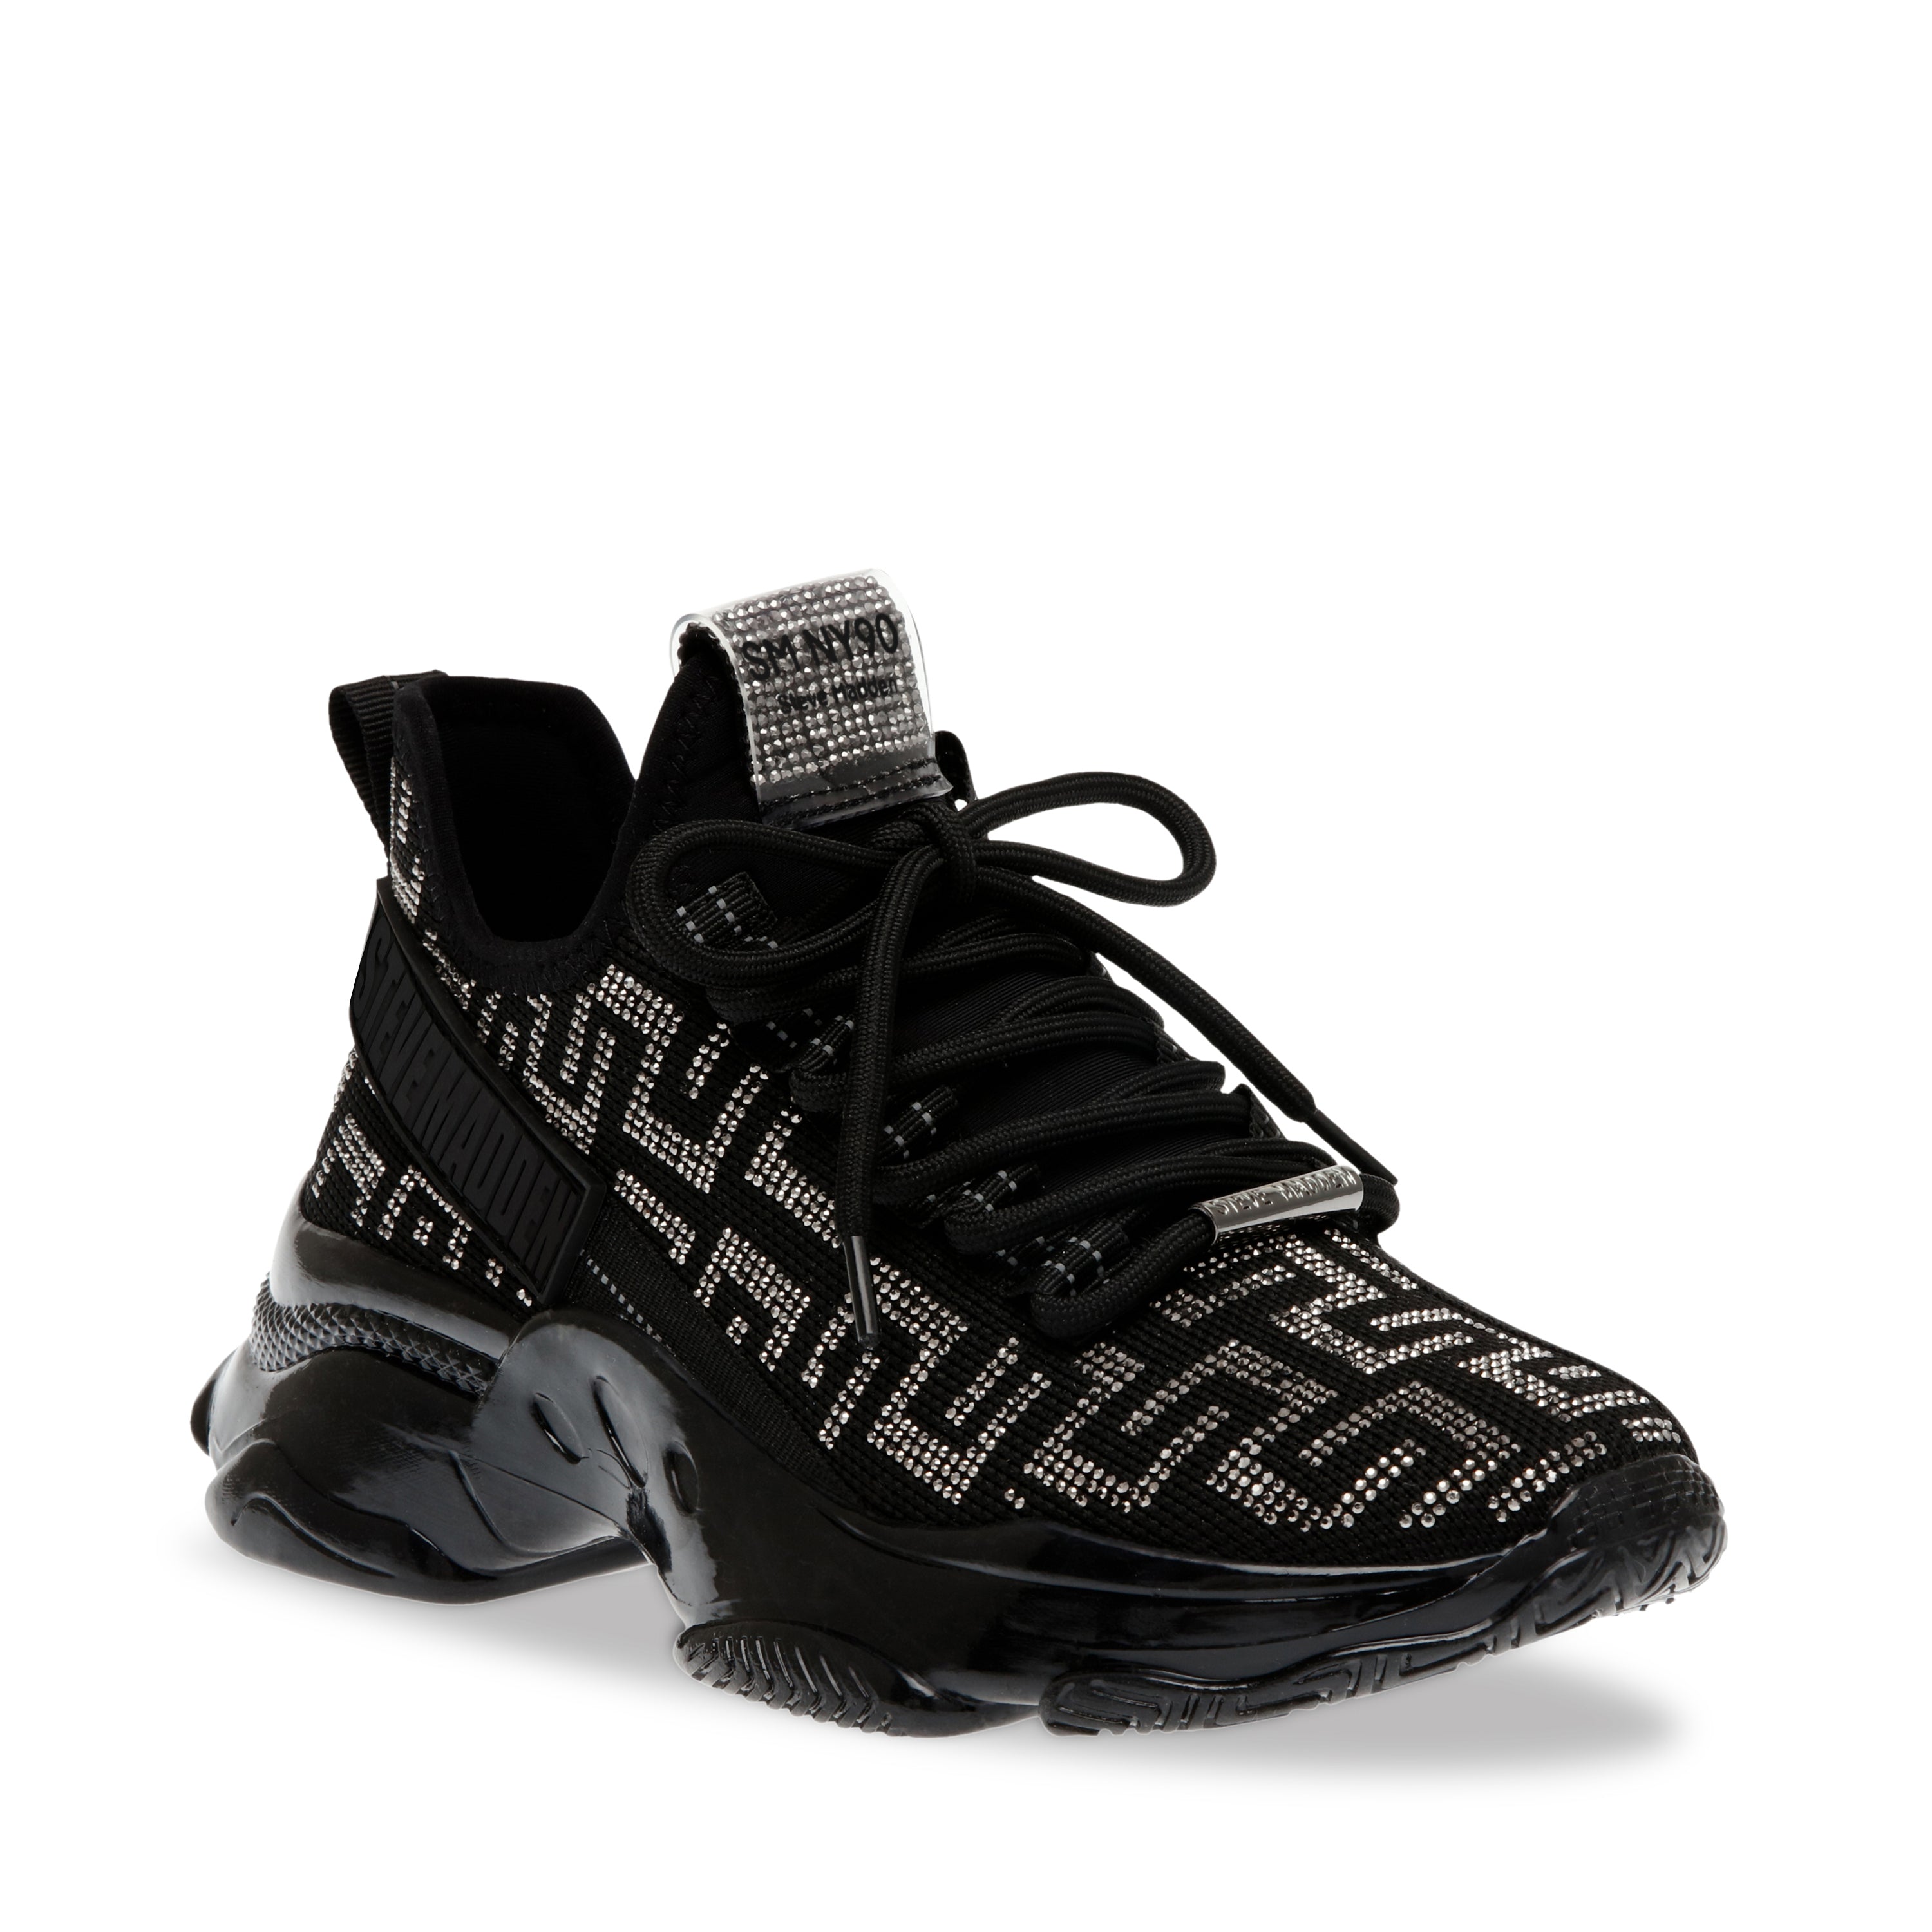 MAXOUT BLACK/SILVER SNEAKERS- Hover Image